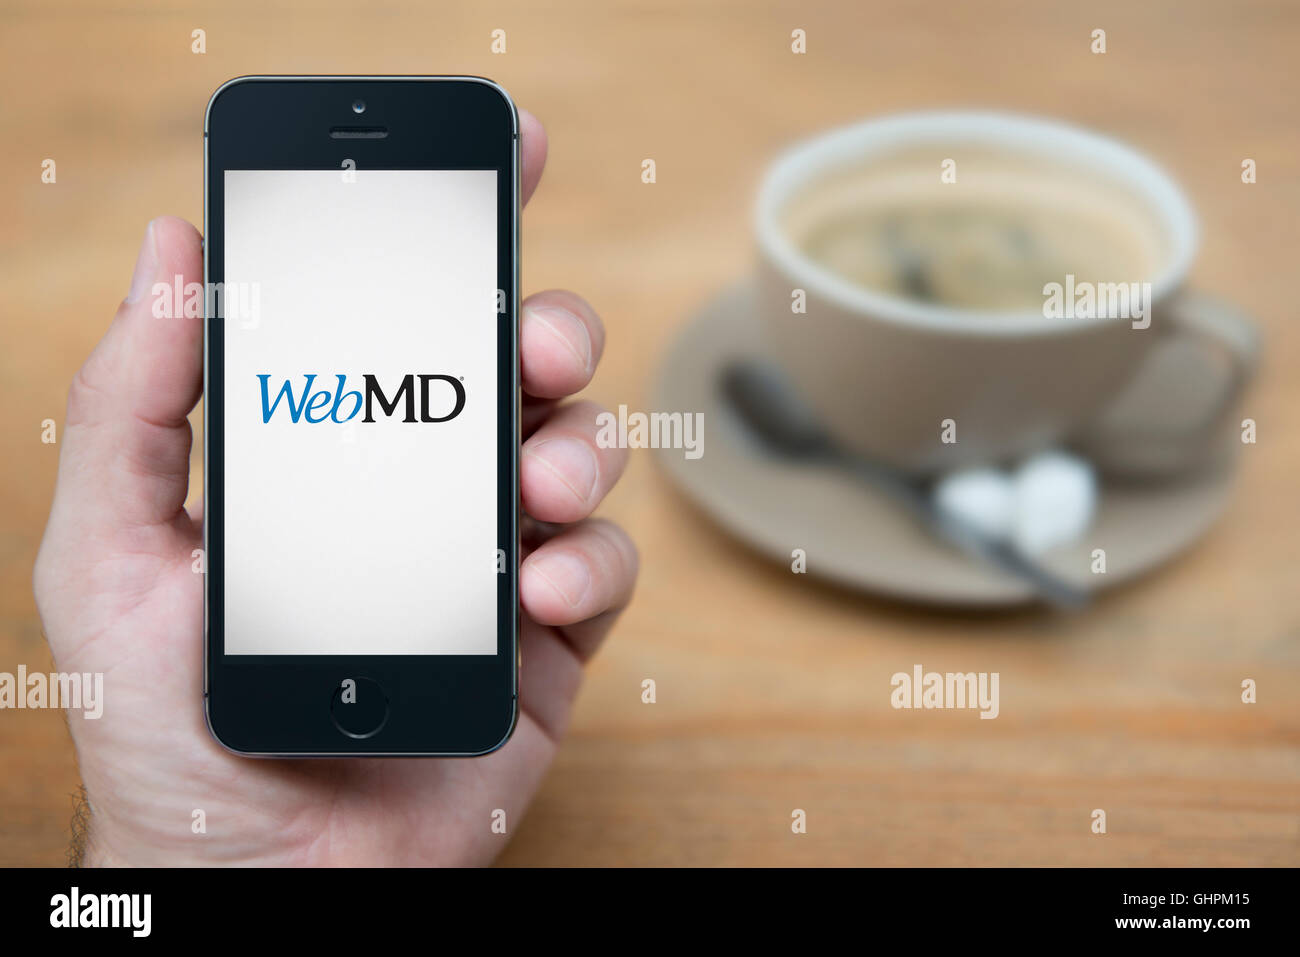 A man looks at his iPhone which displays the WebMD logo, while sat with a cup of coffee (Editorial use only). Stock Photo